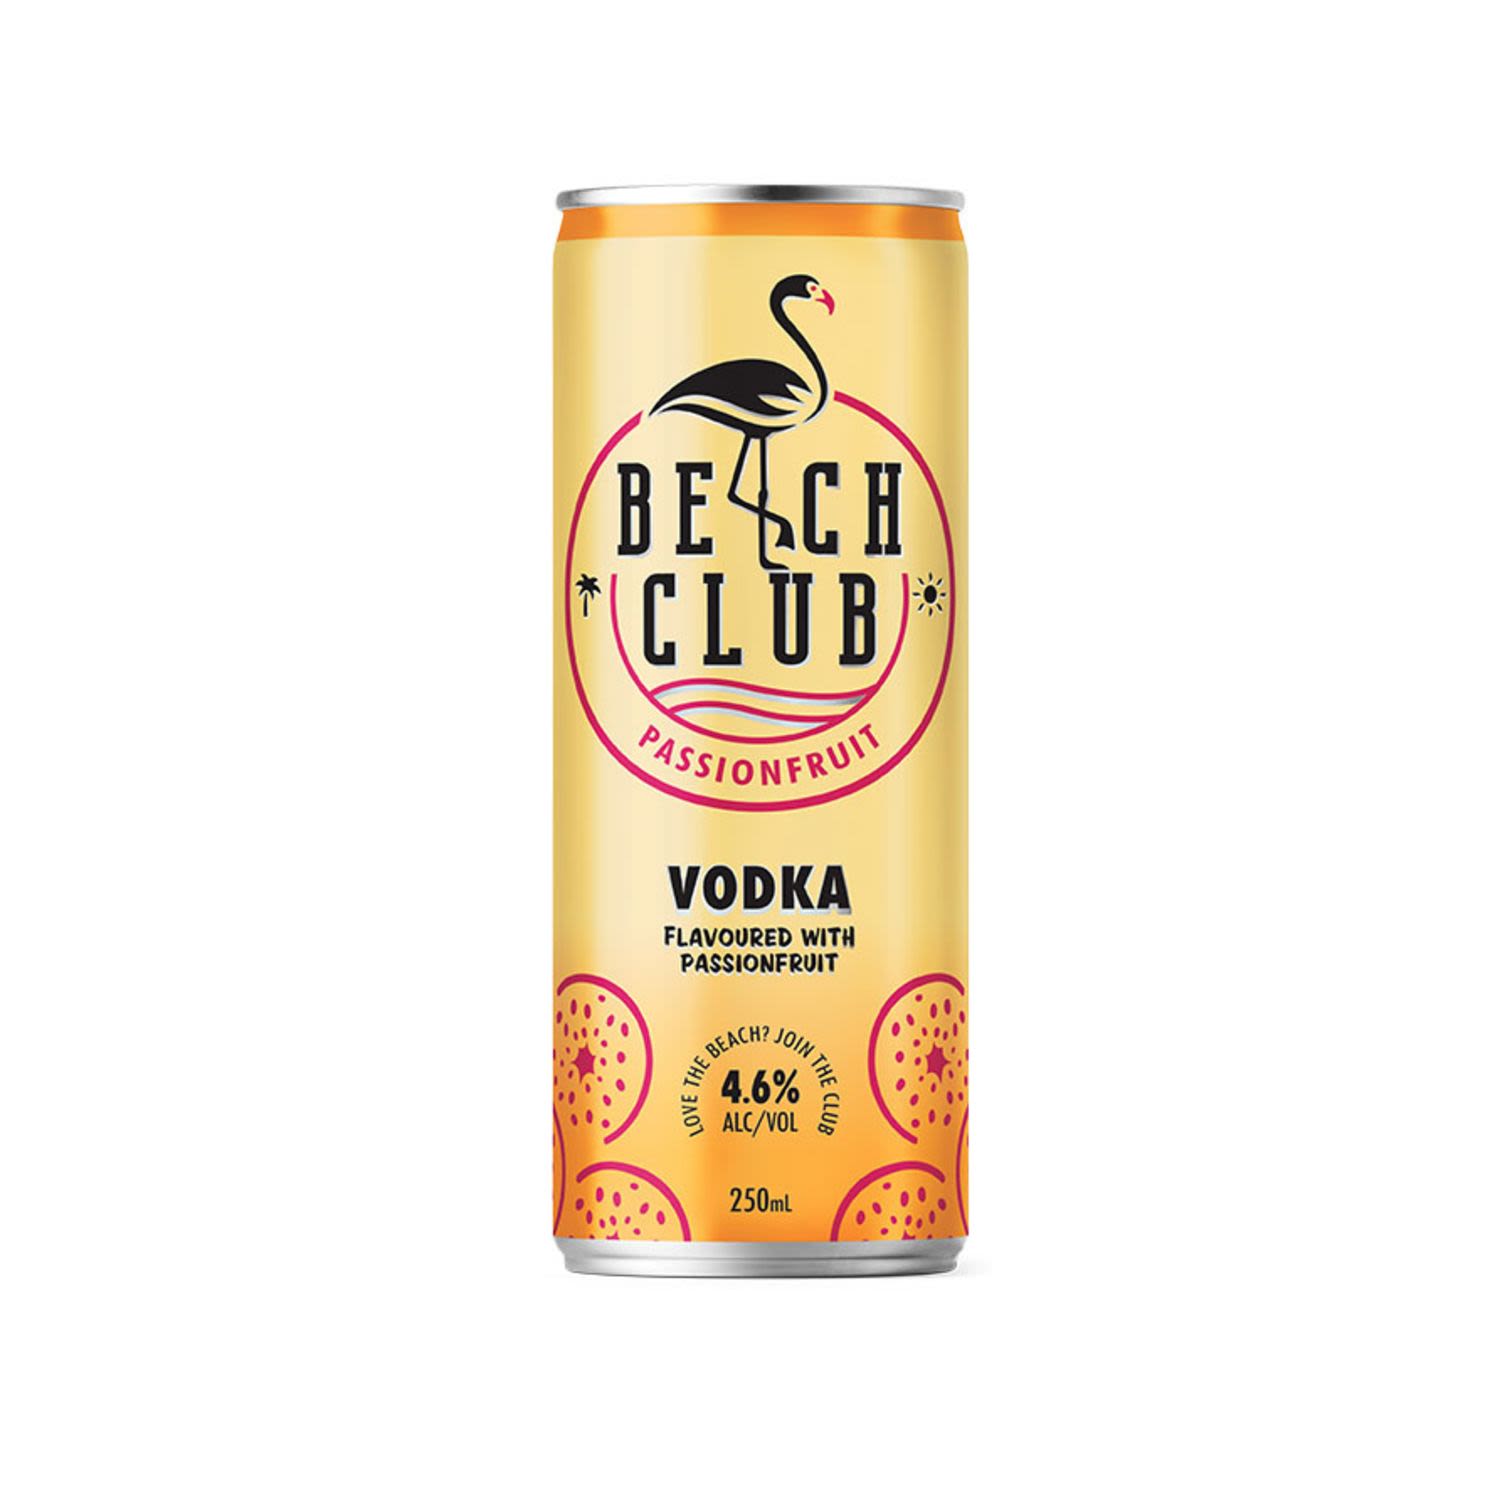 Beach Club Vodka Passionfruit Can 250mL 24 Pack